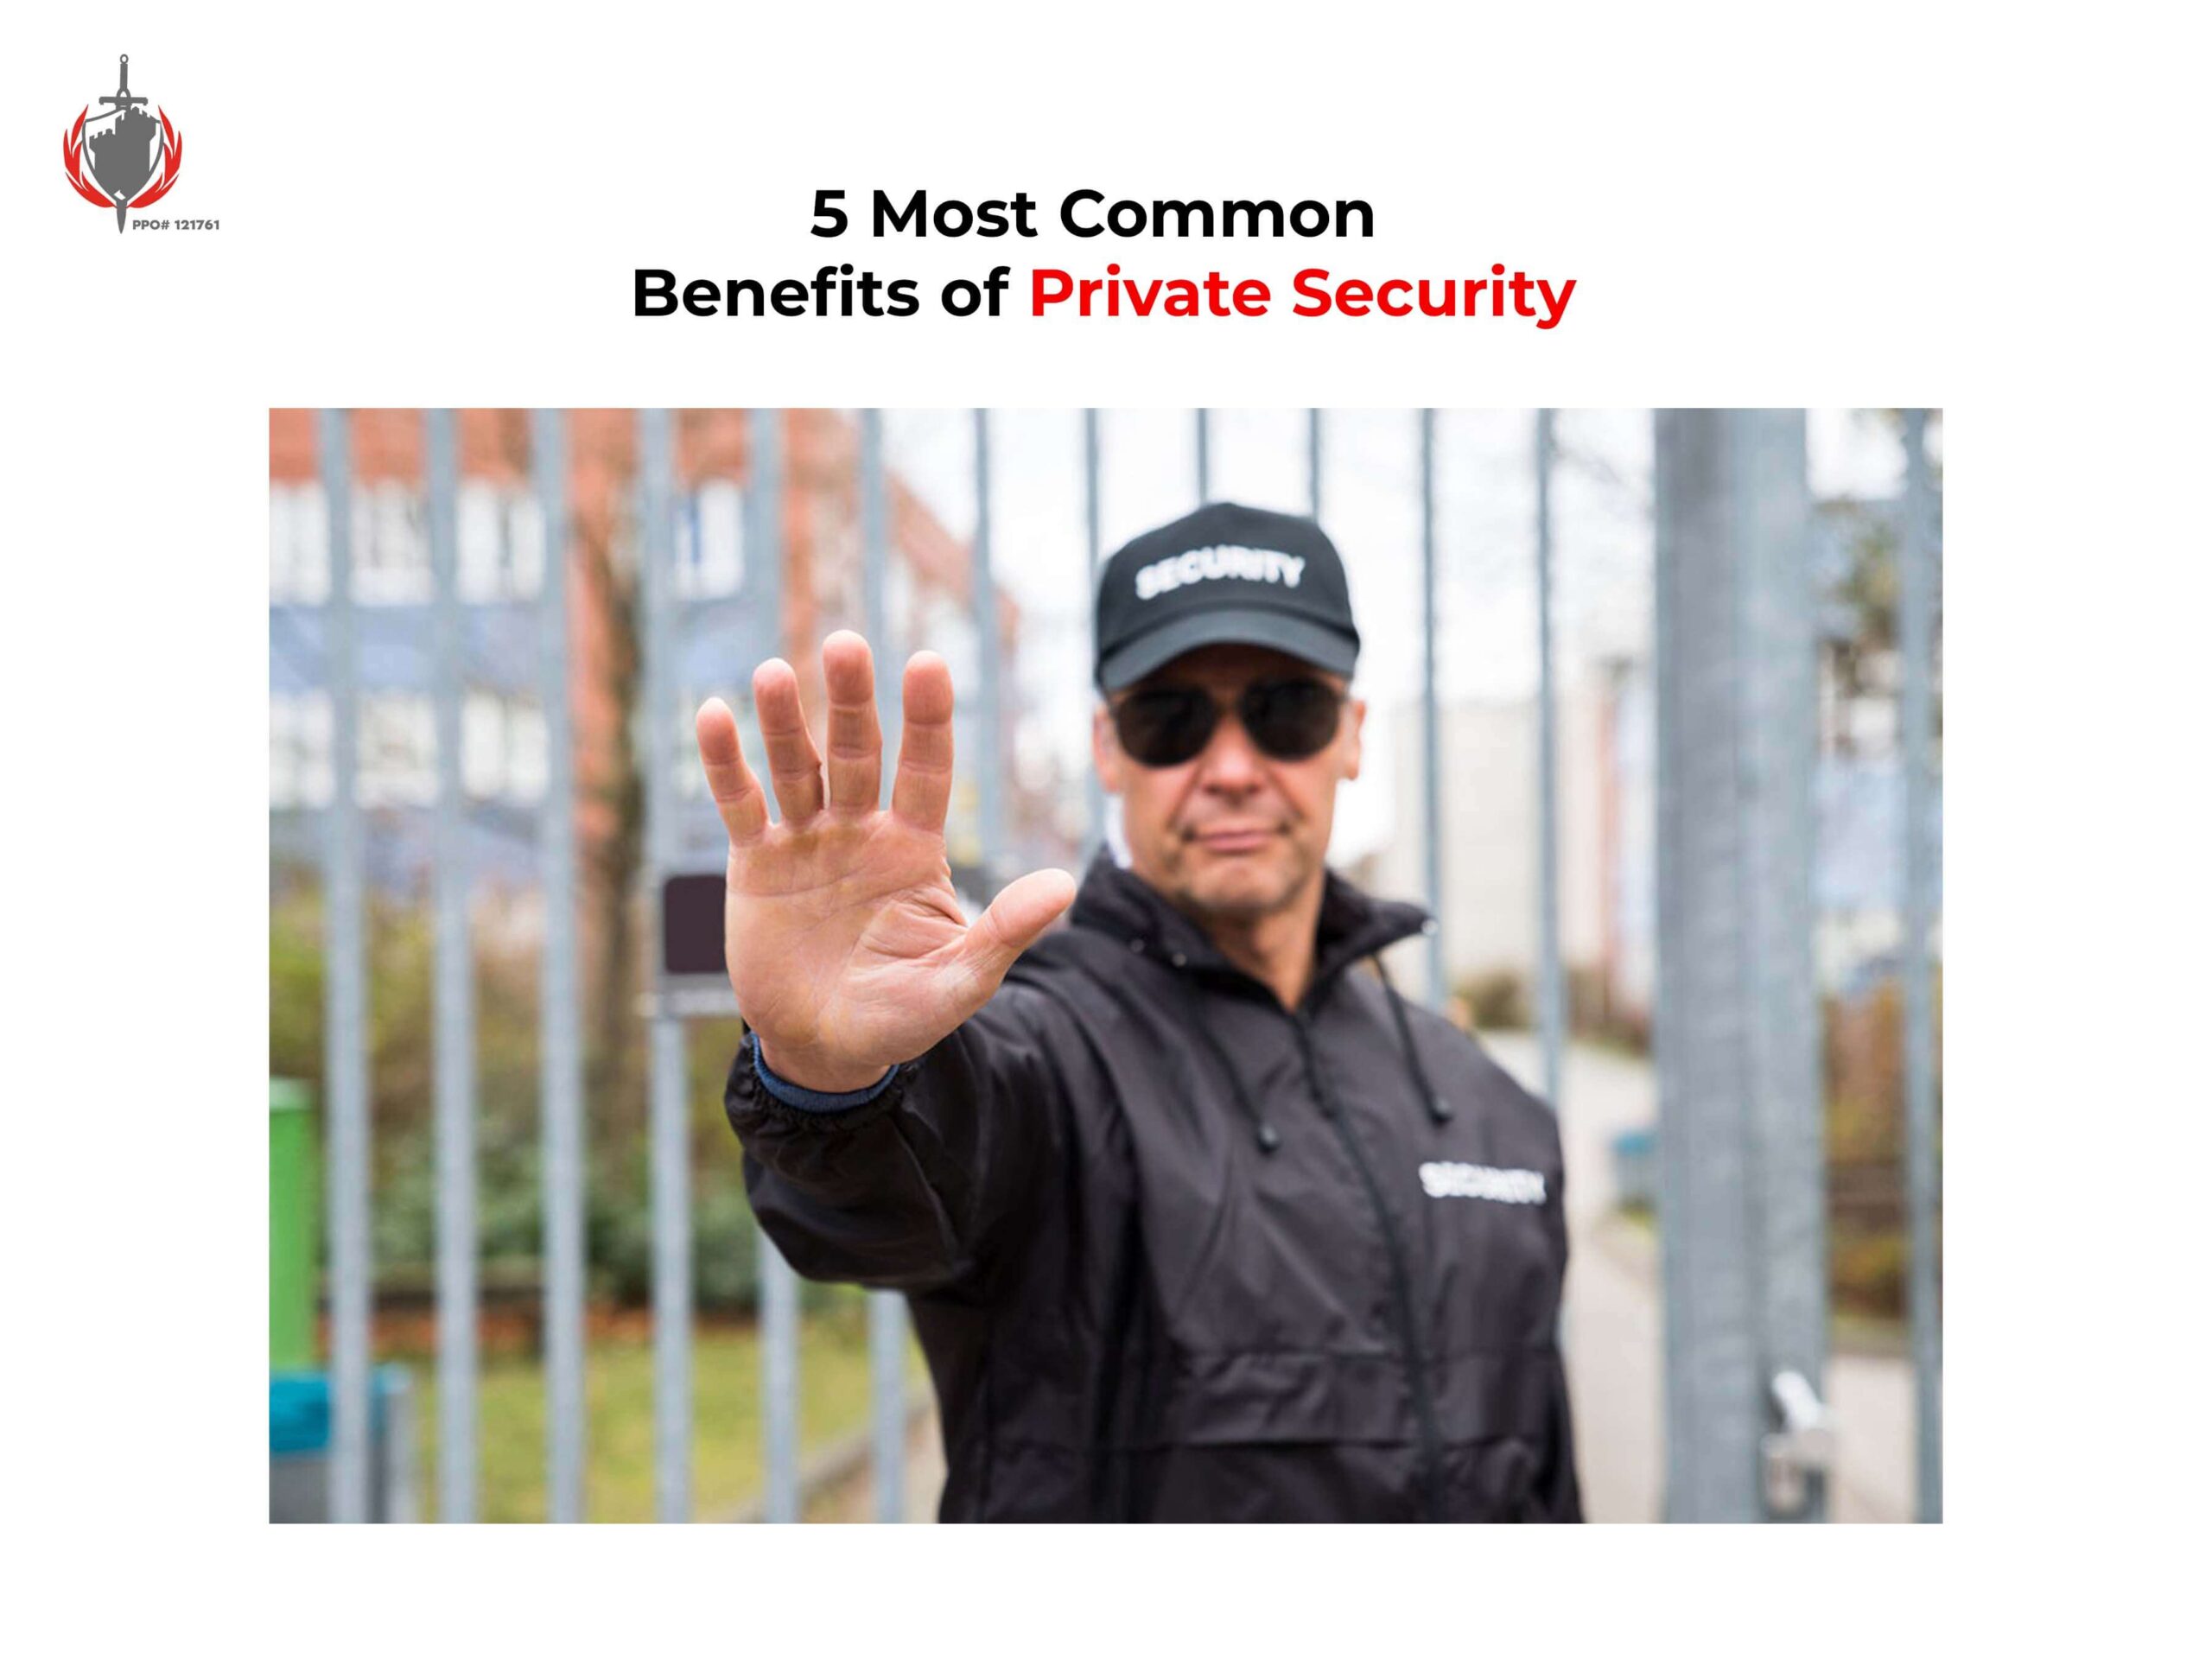 5 Most Common Benefits of Private Security